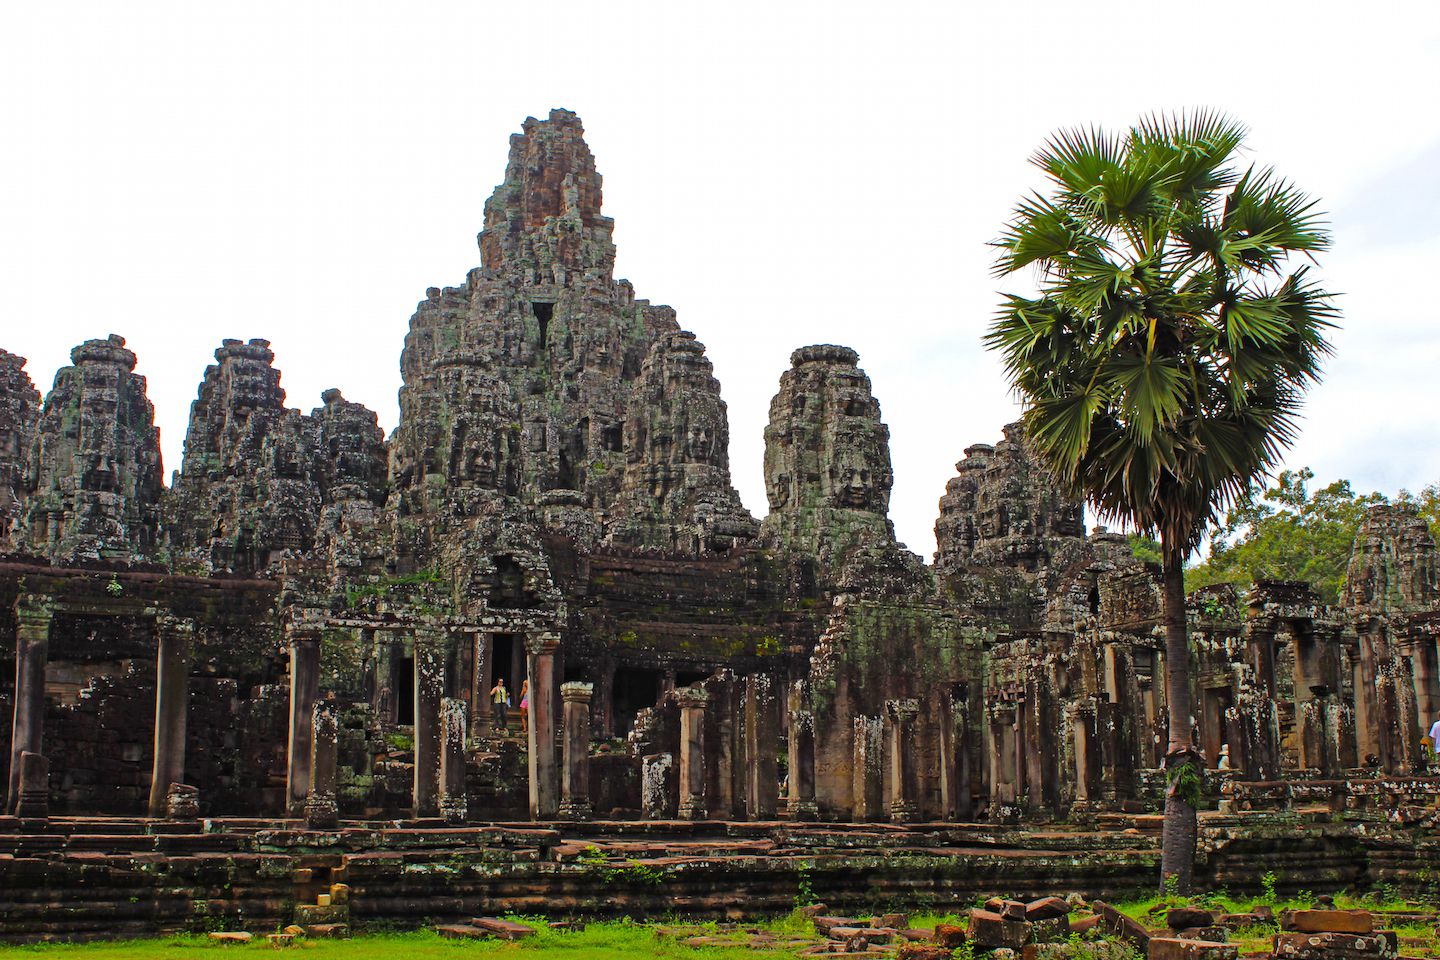 View of the Bayon